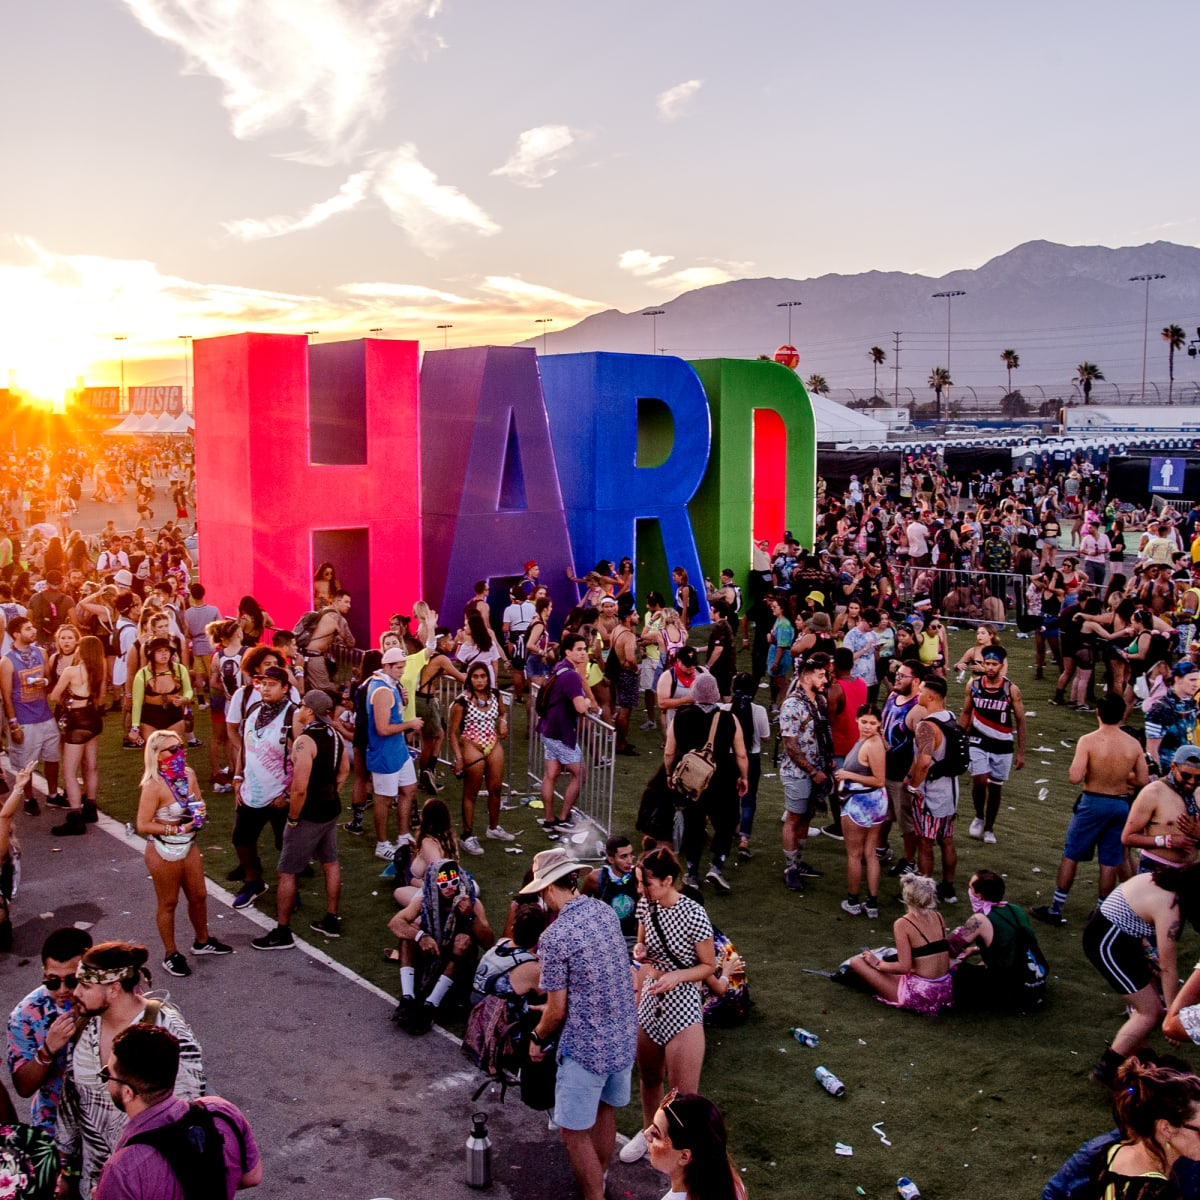 HARD Summer Announces Postponement to 2021, VIP Ticket Upgrades  -  The Latest Electronic Dance Music News, Reviews & Artists